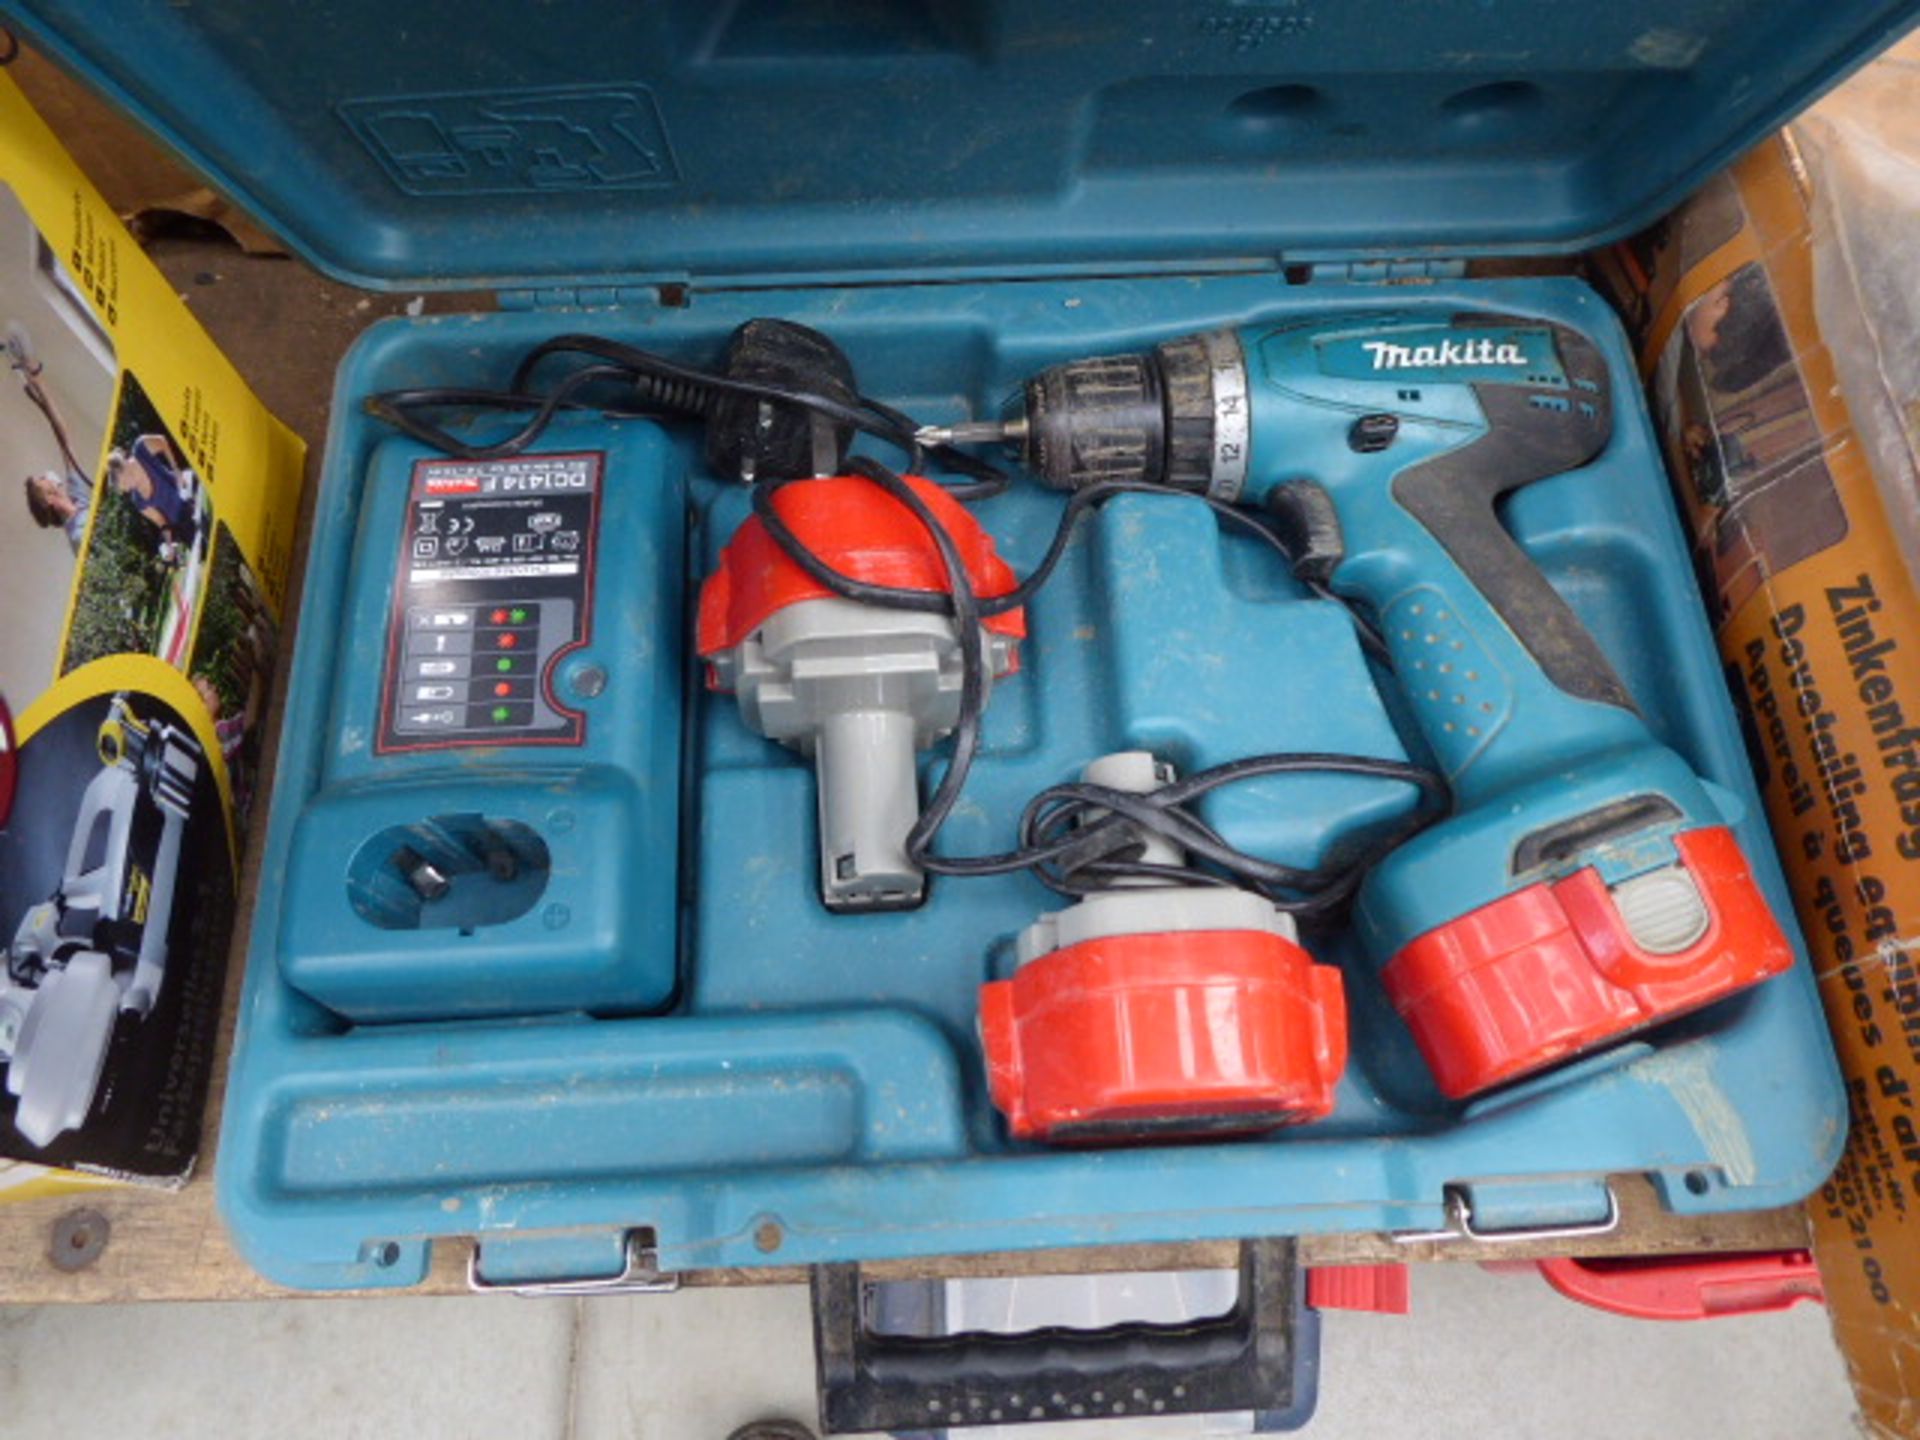 Makita cordless drill with three batteries and a charger